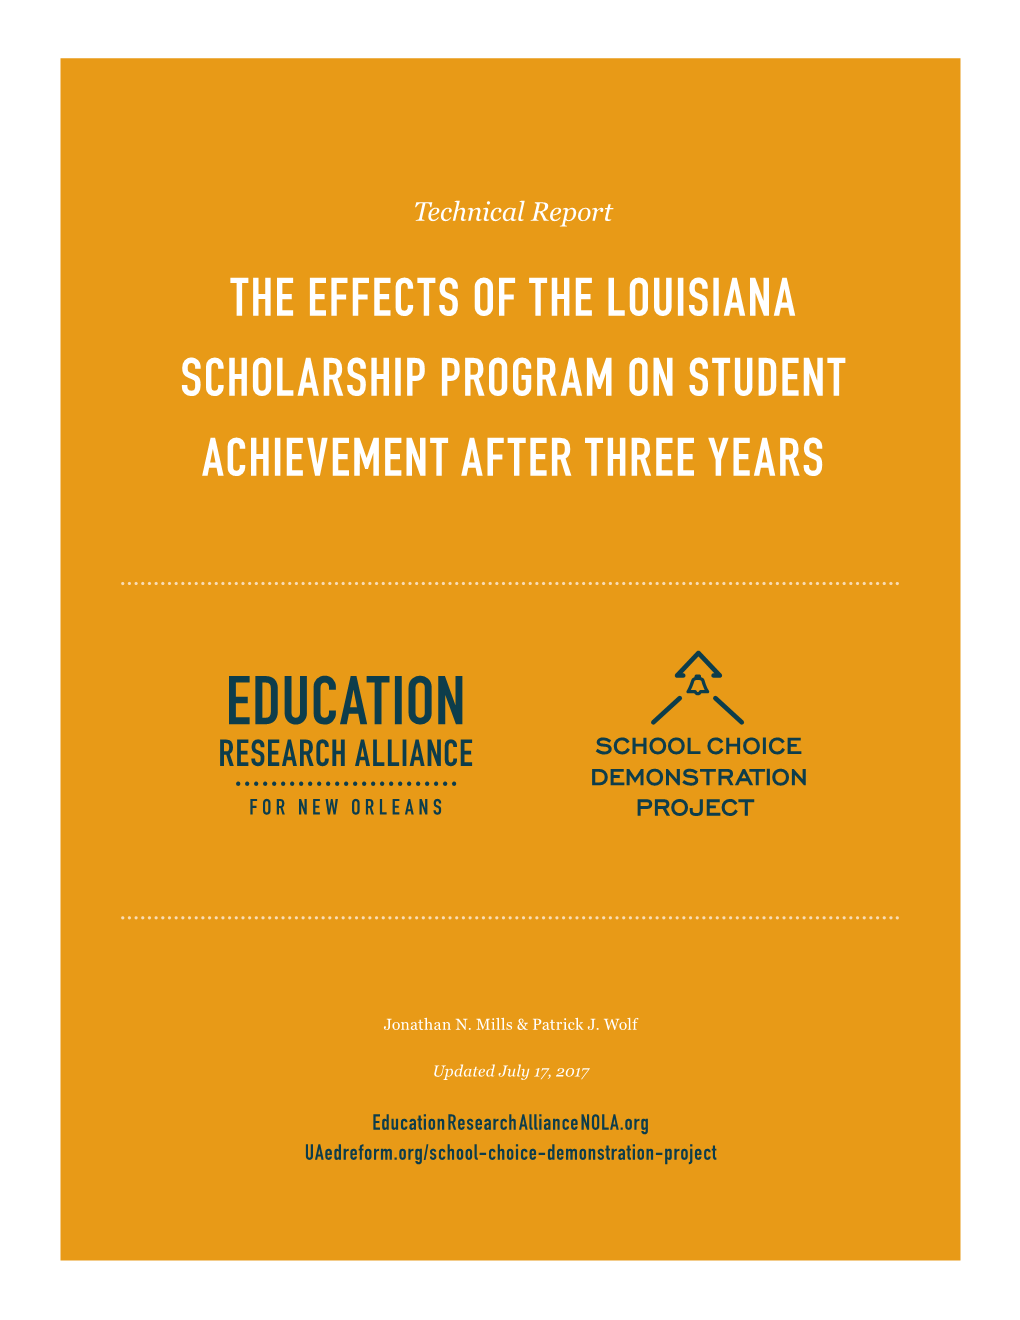 The Effects of the Louisiana Scholarship Program on Student Achievement After Three Years